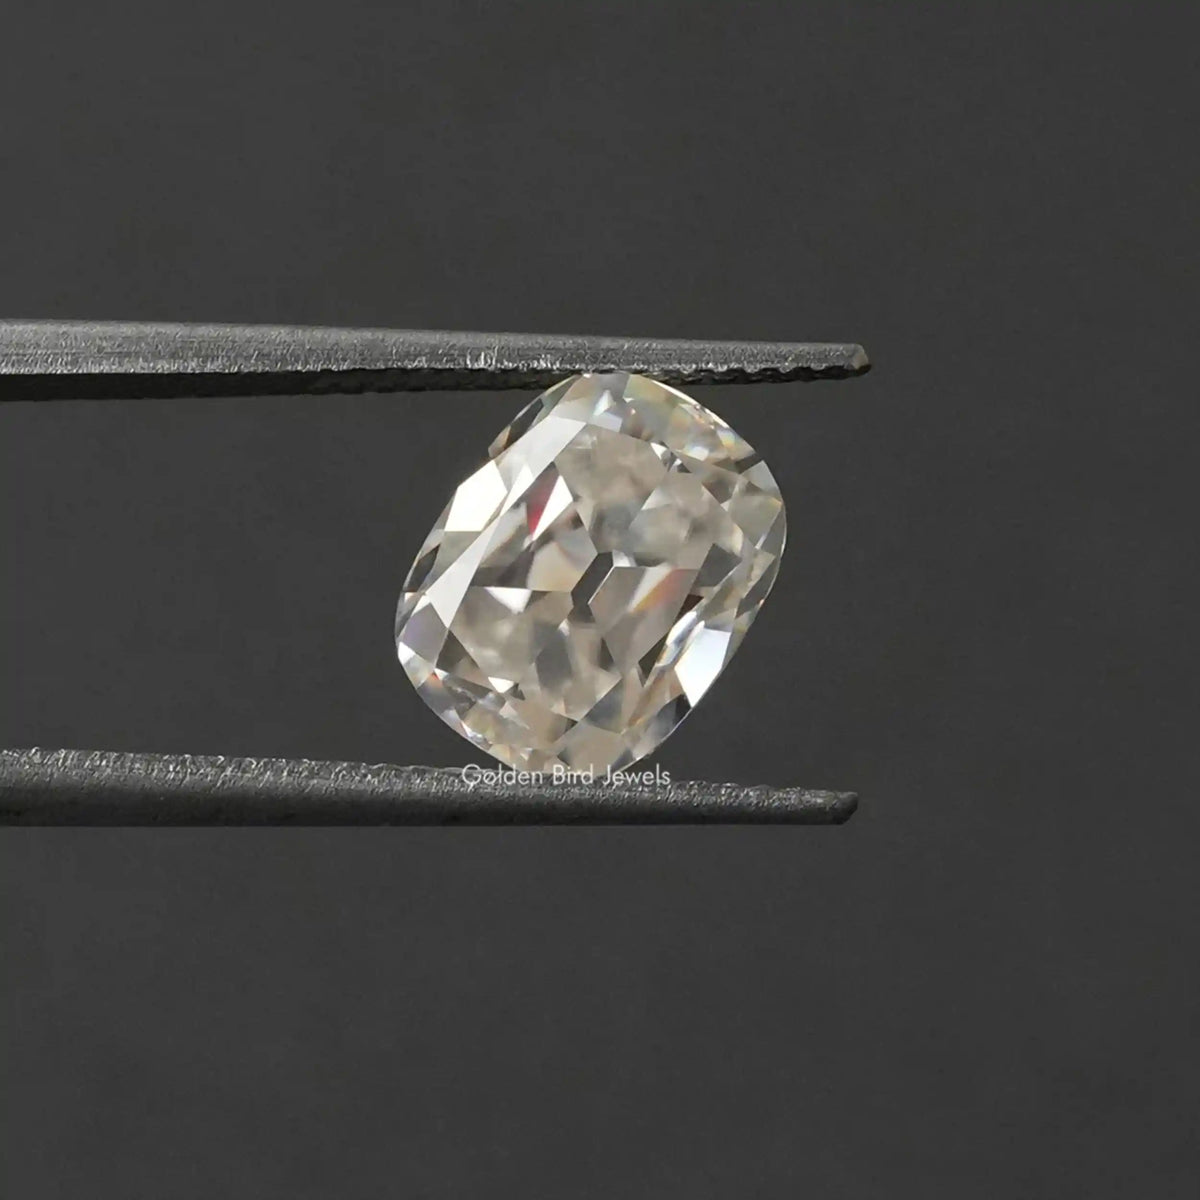 [In tweezer front view of cushion cut loose moissanite made of vvs clarity]-[Golden Bird Jewels]